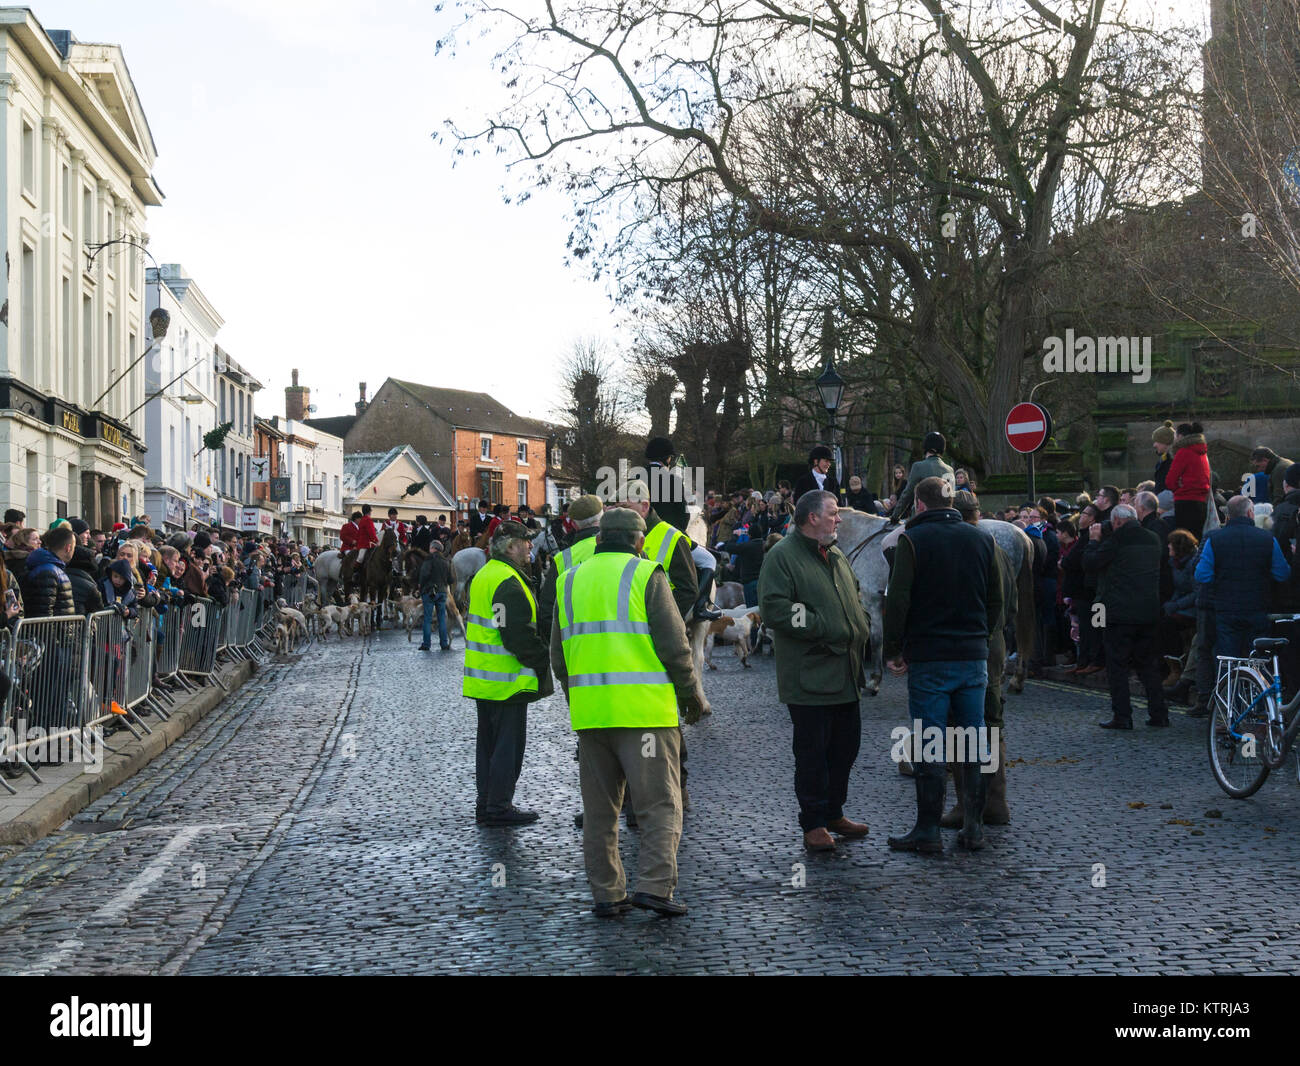 Crowds gathered in St Mary's Street in Newport Shropshire England UK for Albrighton and Woodland Hunt's traditional annual Boxing Day gathering Stock Photo